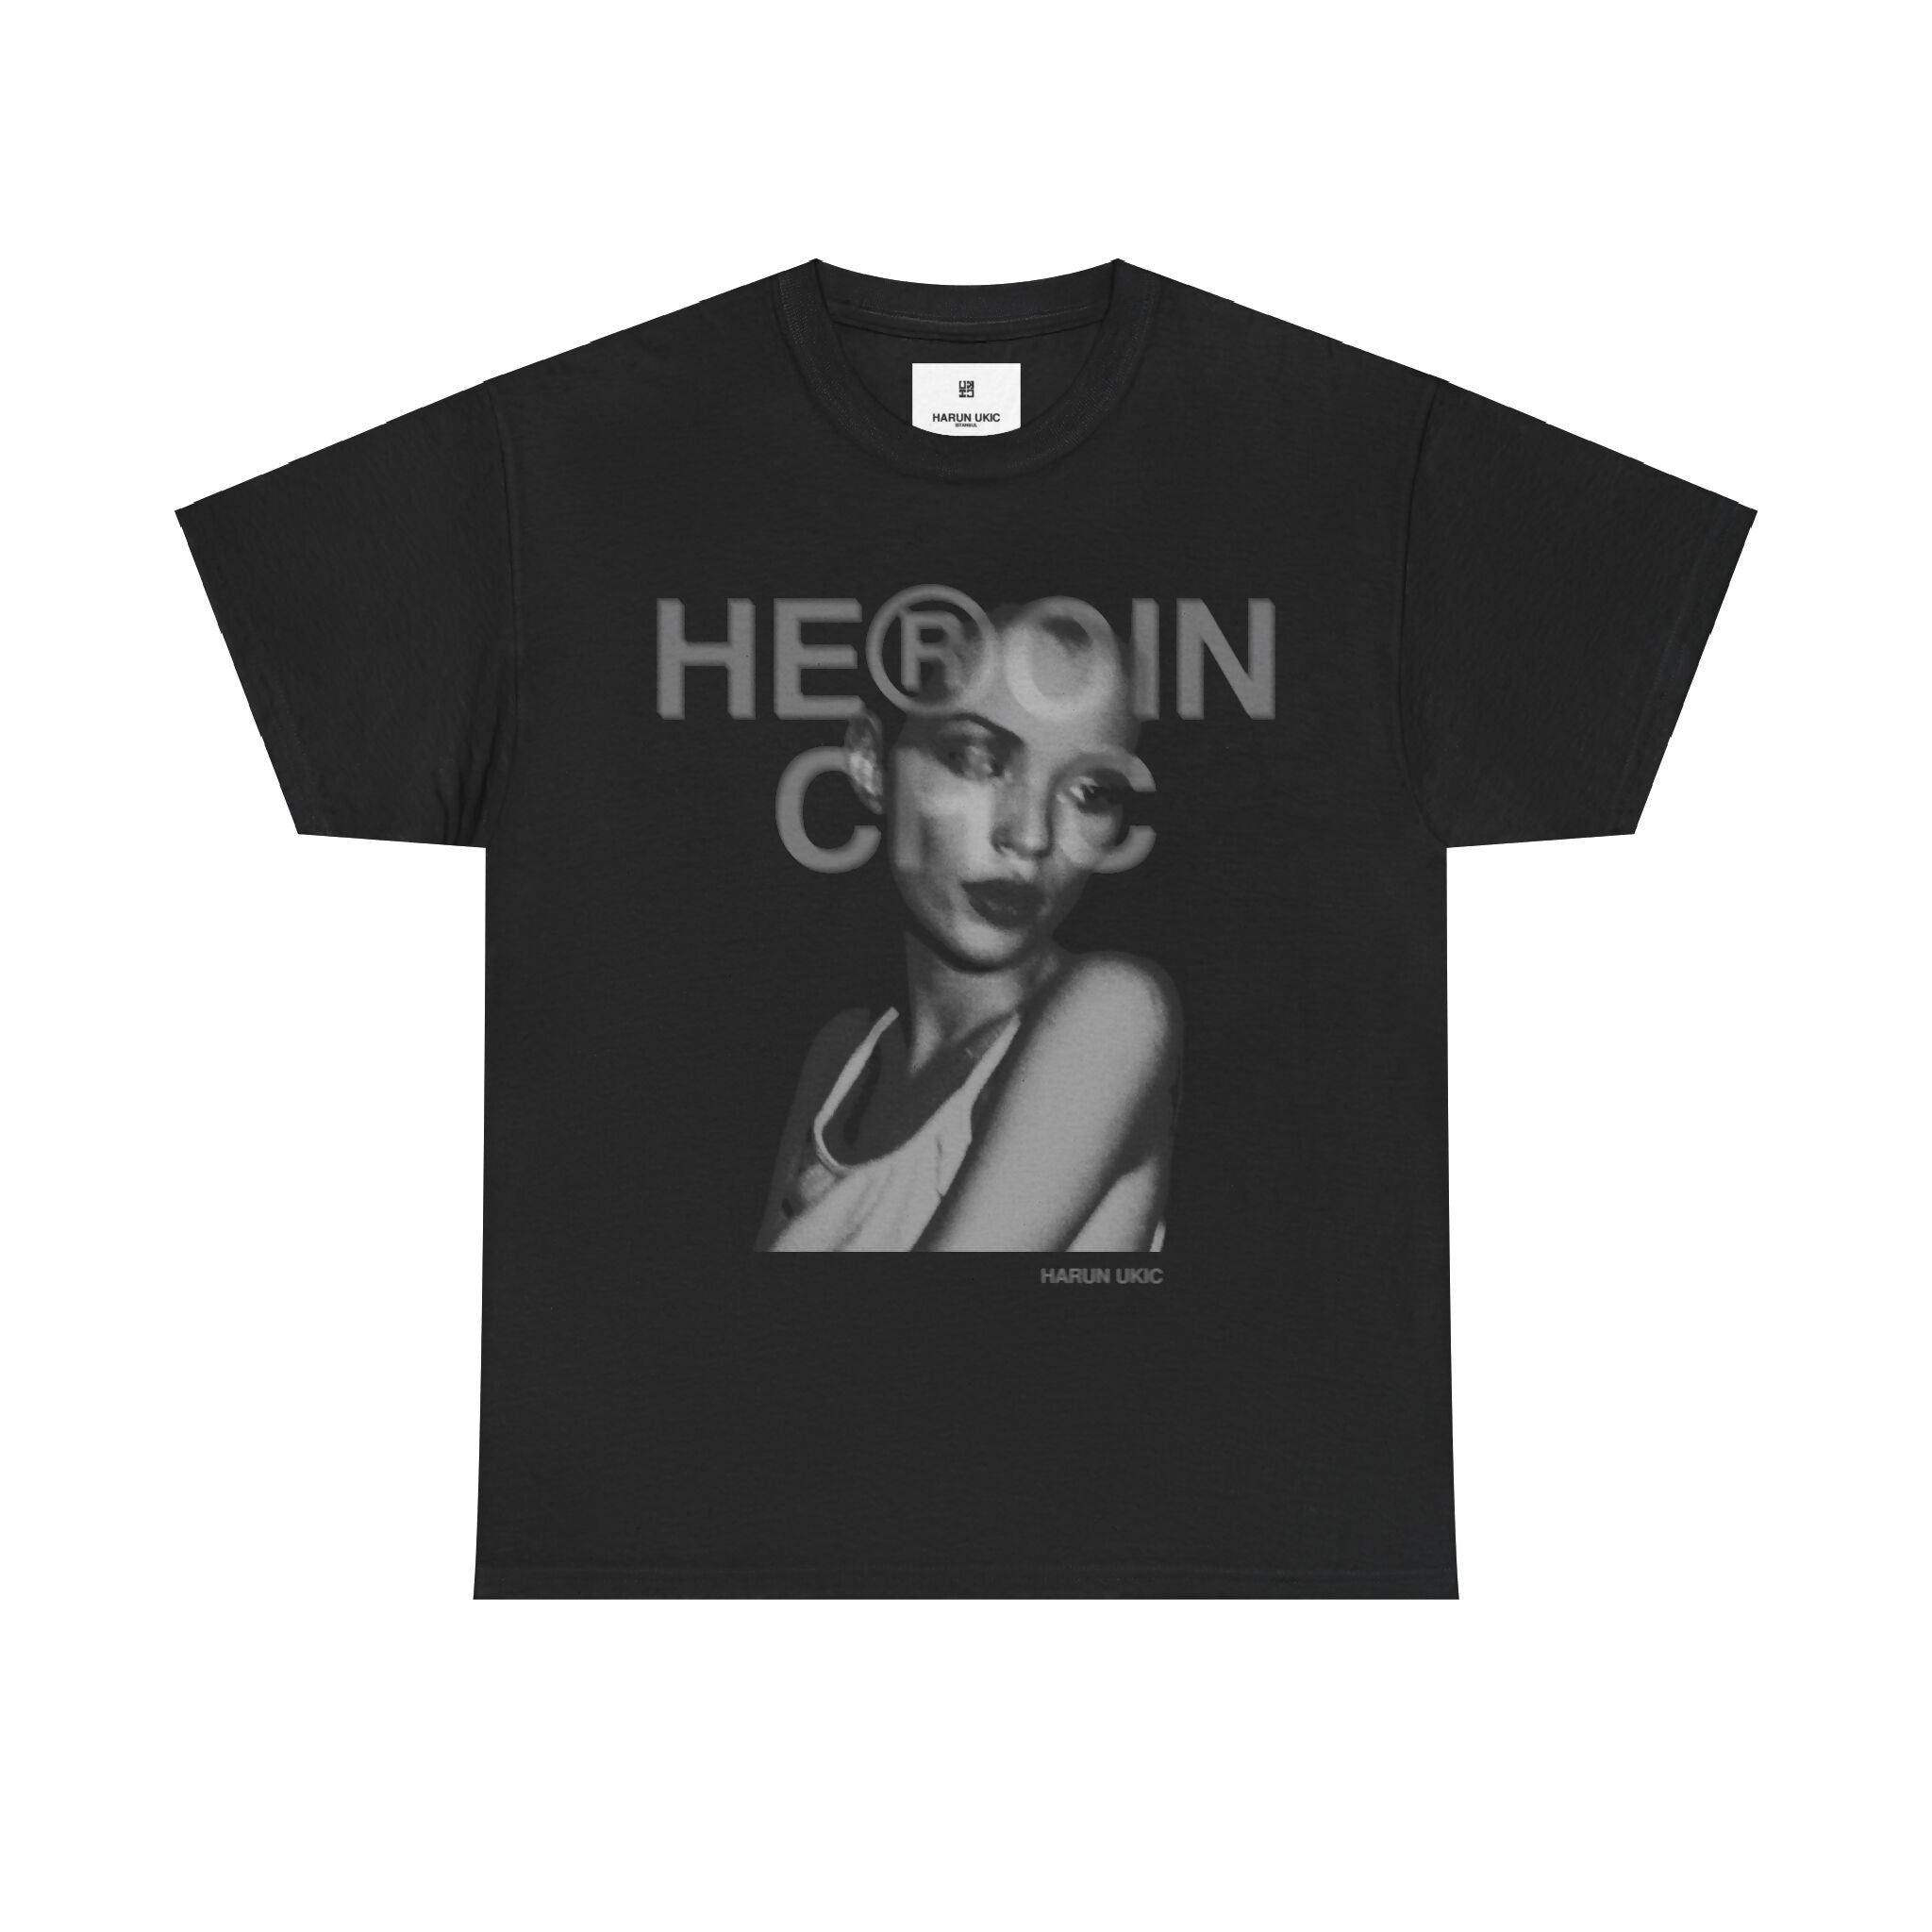 HEROIN CHIC 02 T-SHIRT CLASSIC FIT